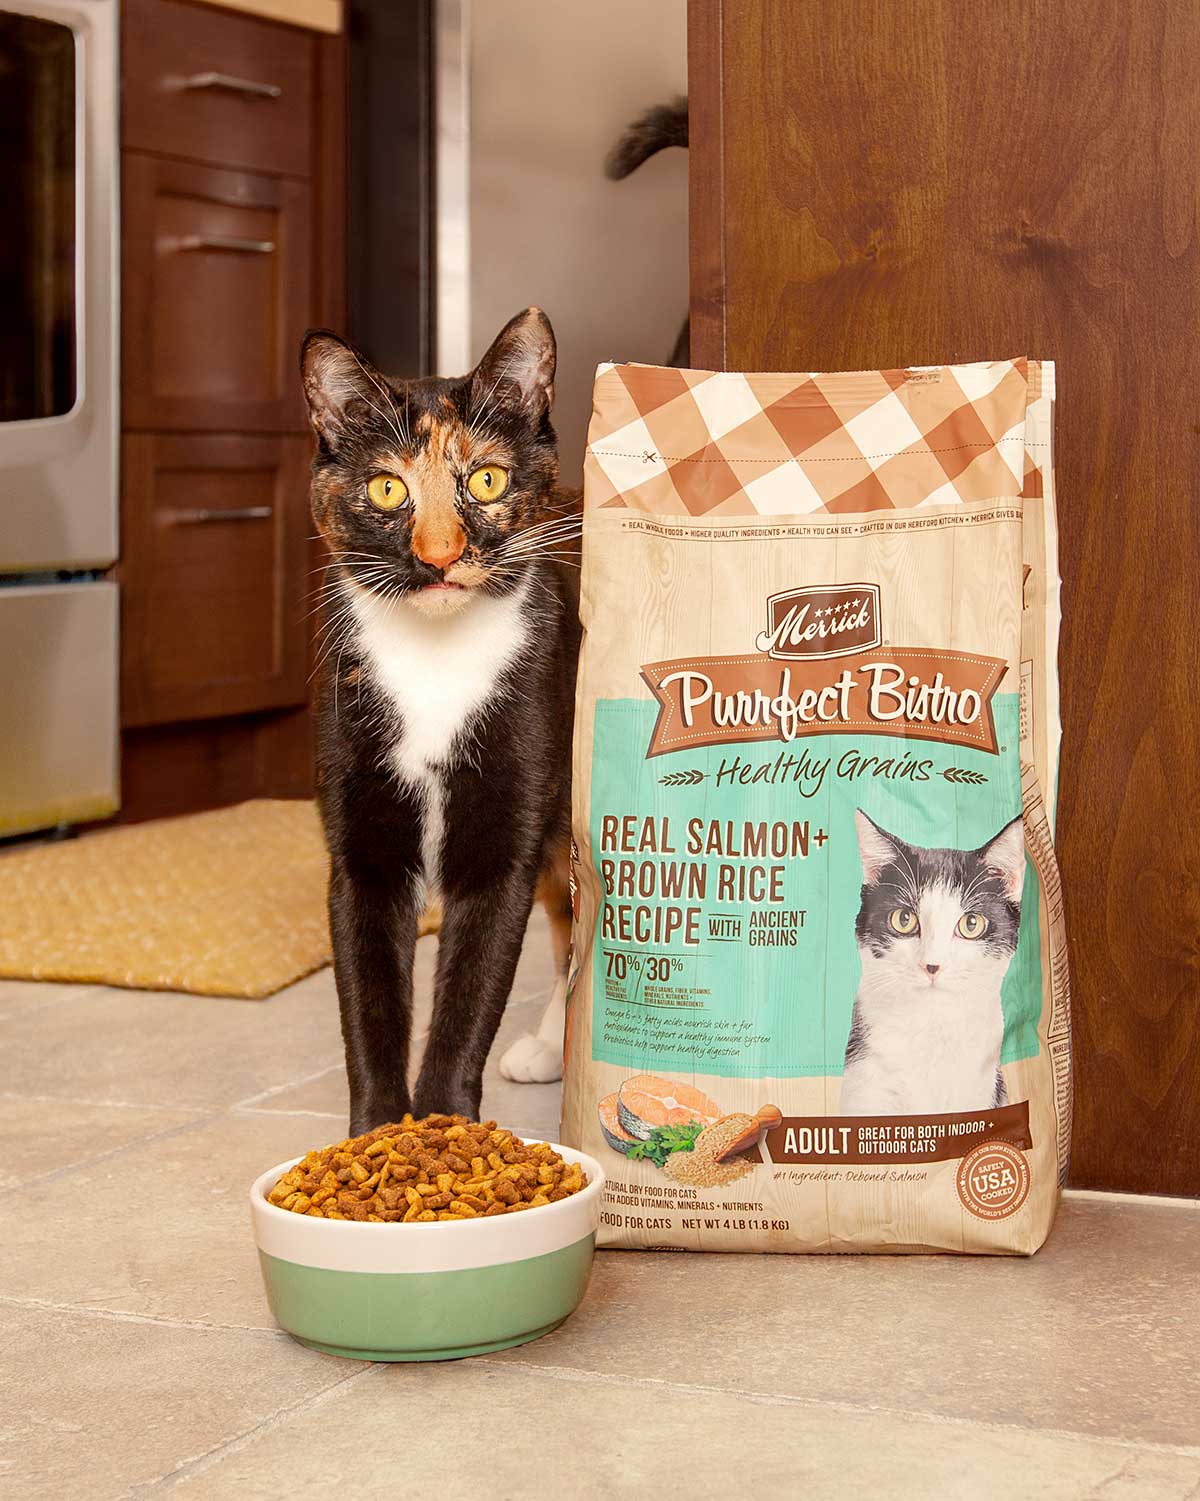 Cat with striking yellow eyes poses with a bowl of cat food and the food bag.